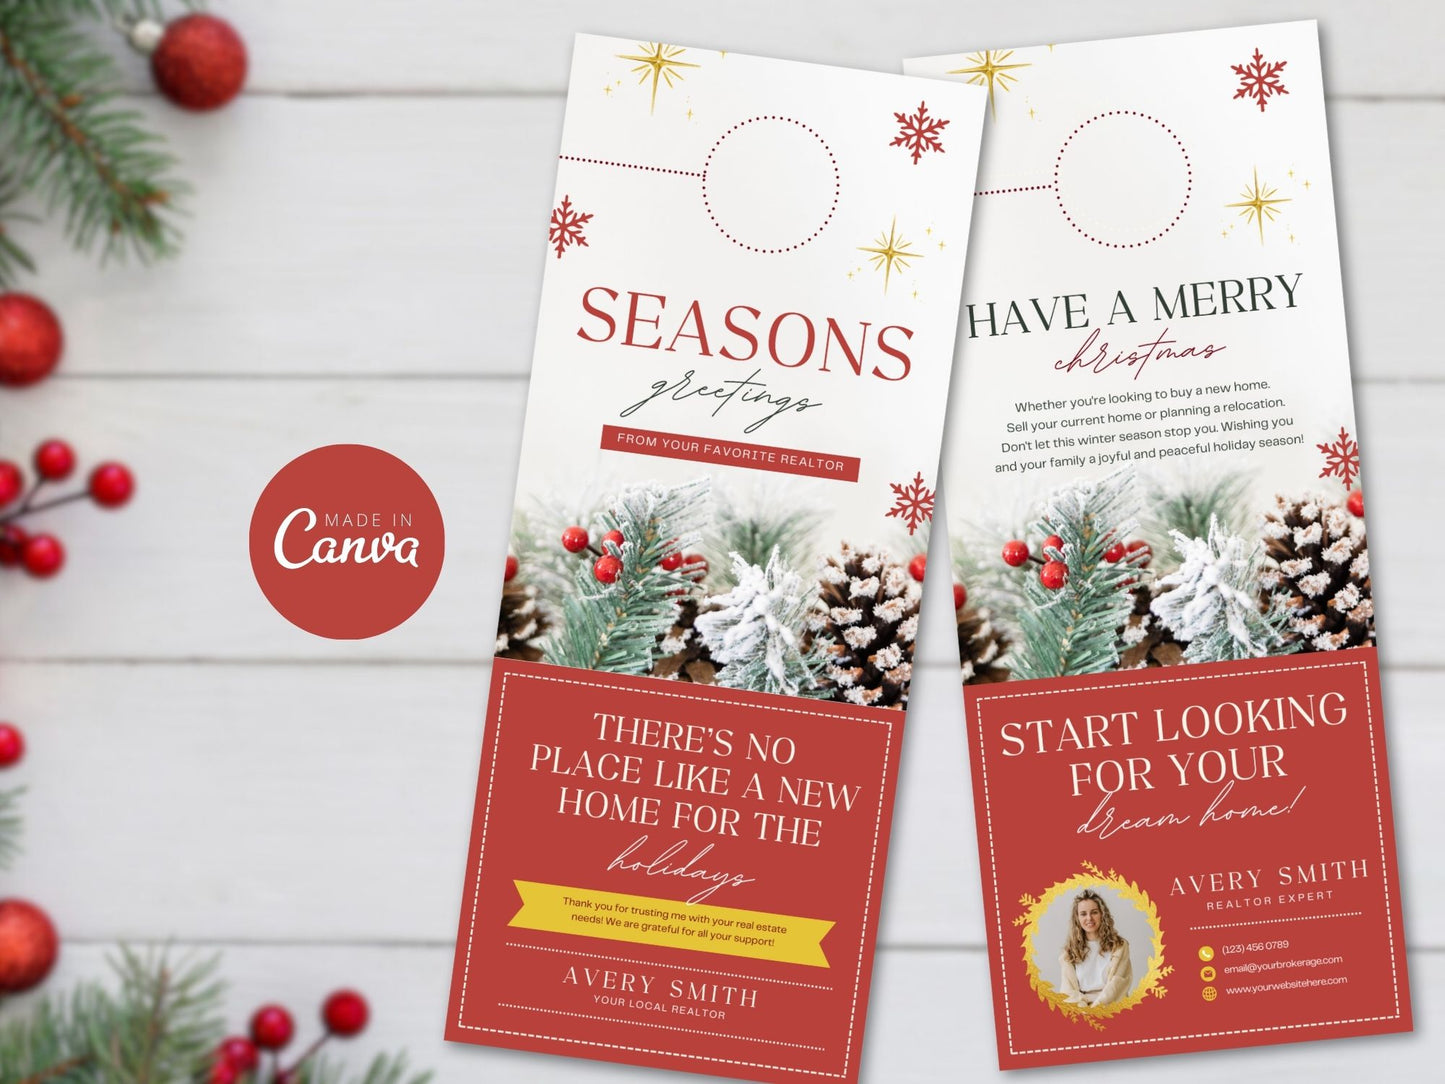 Real Estate Seasons Greeting Christmas Door Hanger - Red: Spreading Festive Holiday Cheer to Clients and the Community